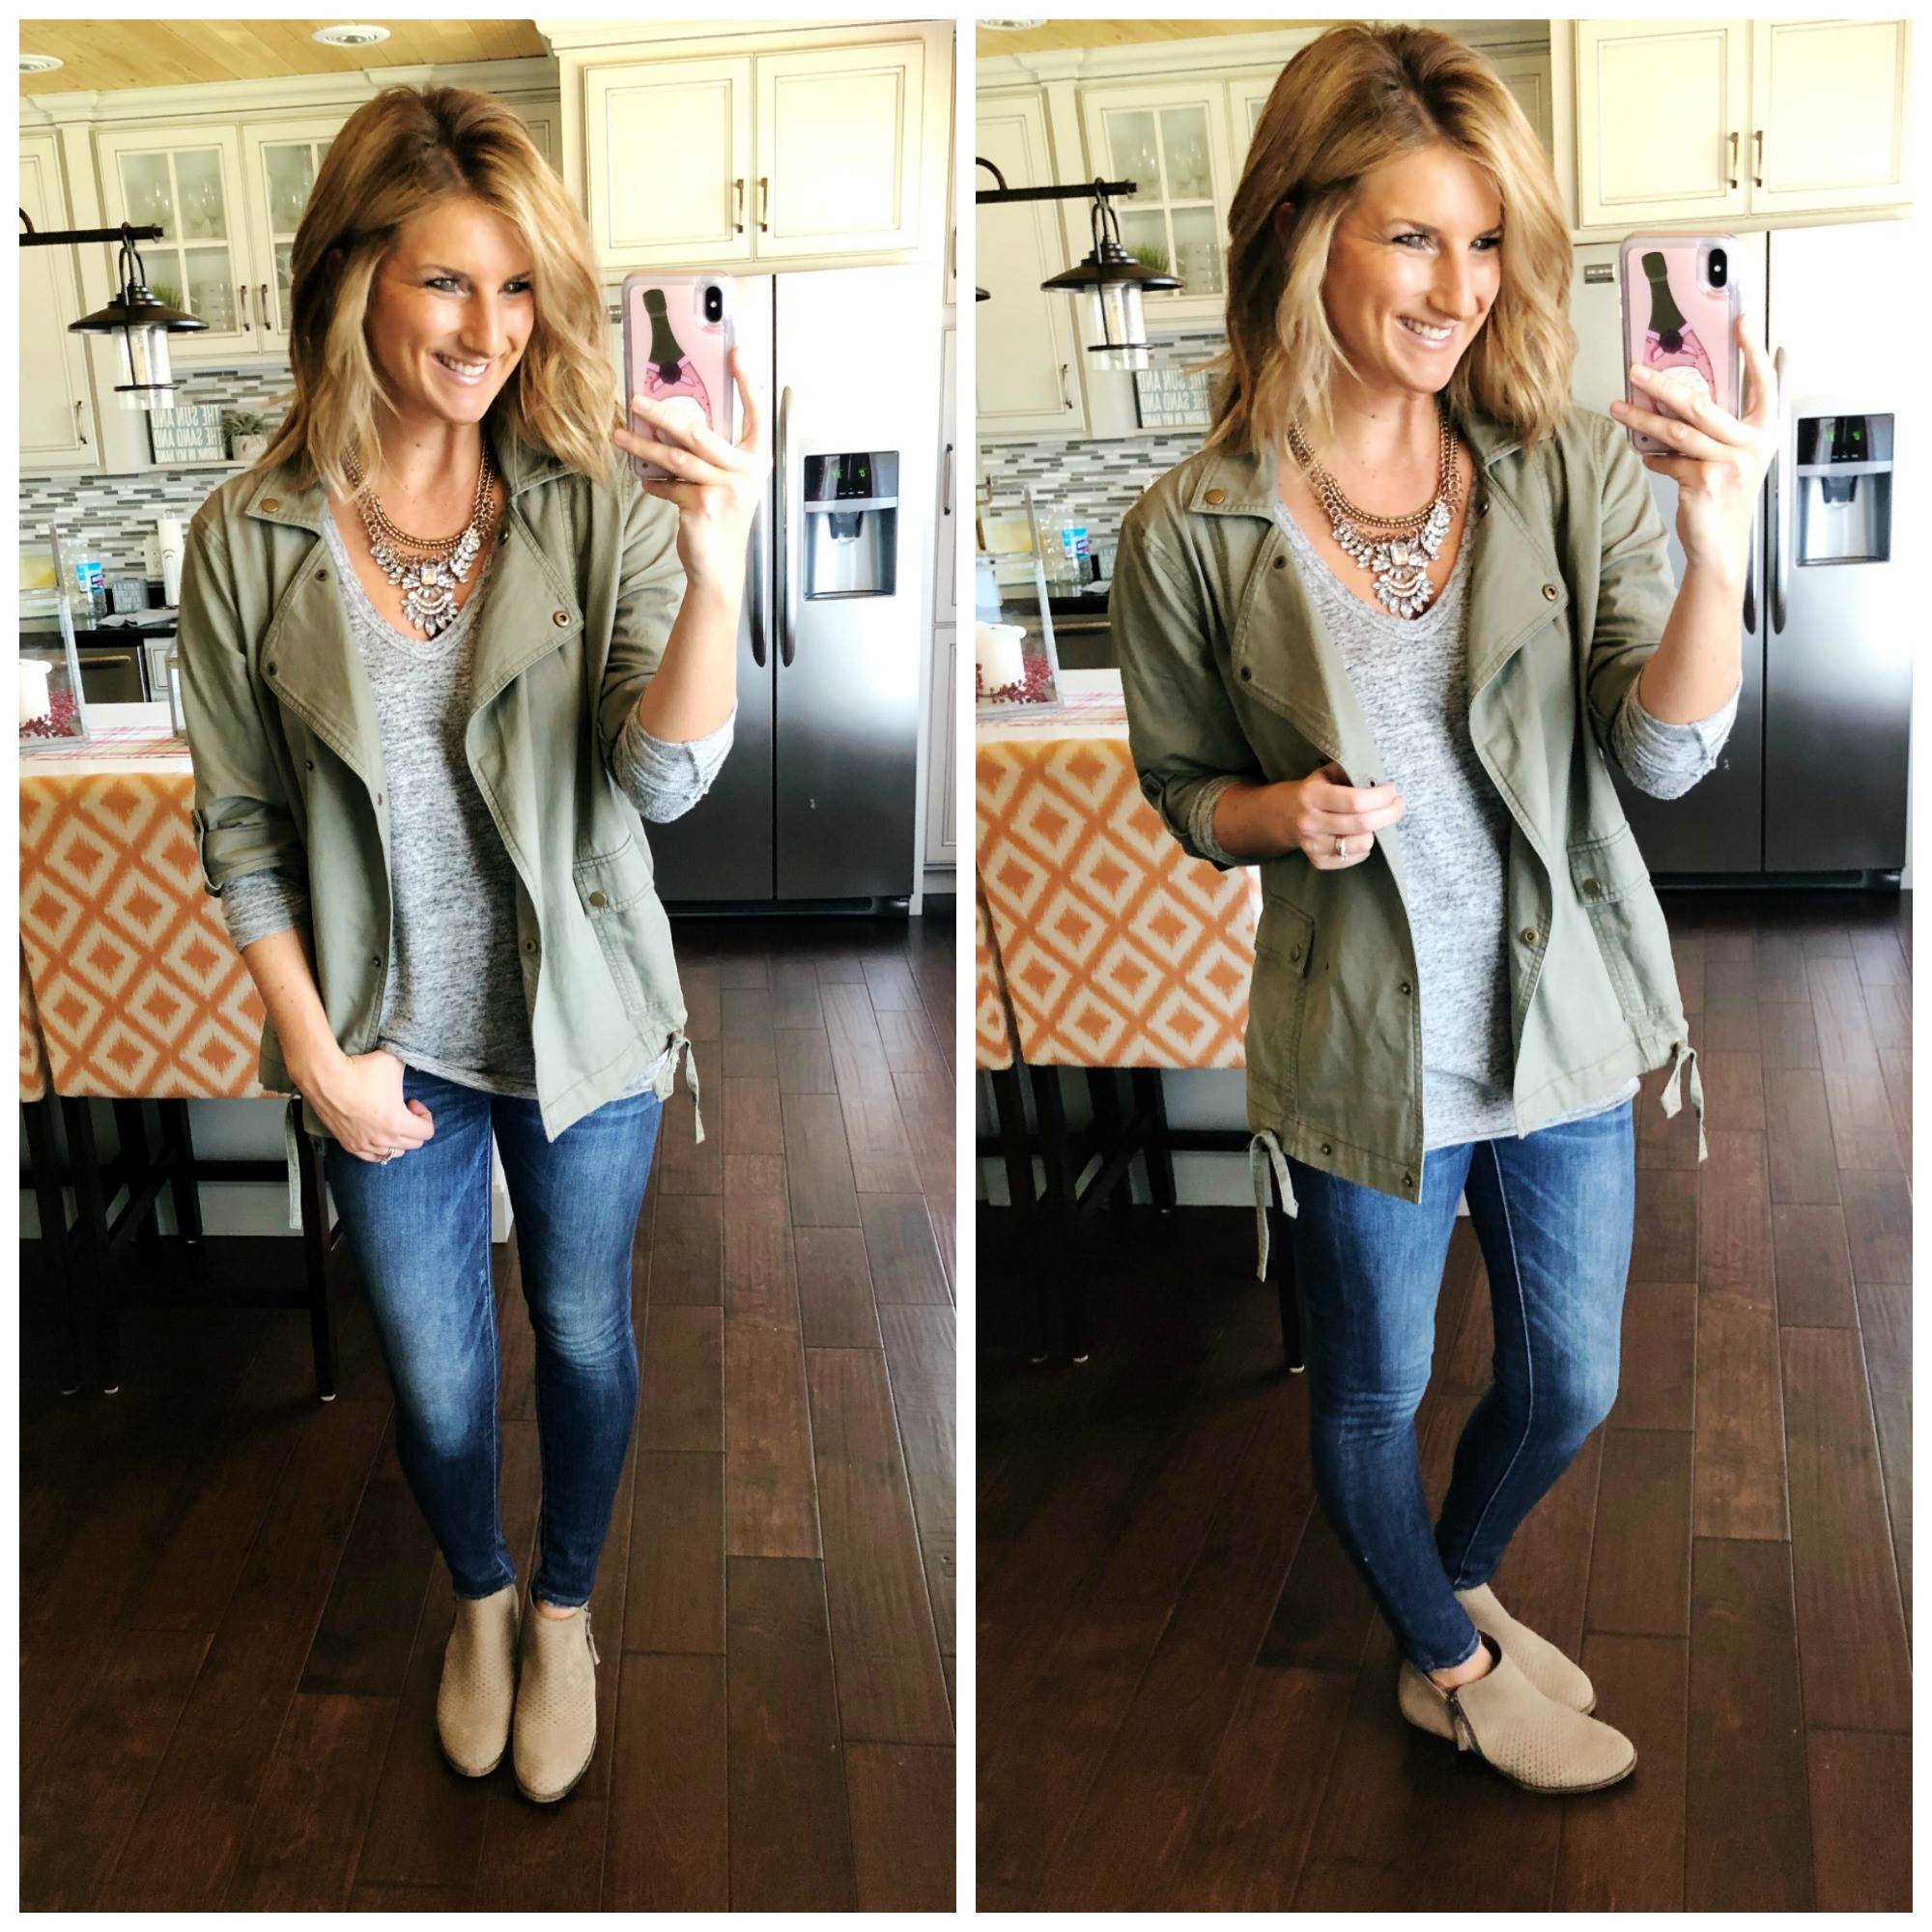 Military Jacket + Grey Top + Jegging + Statement Necklace + Booties // Spring Outfit